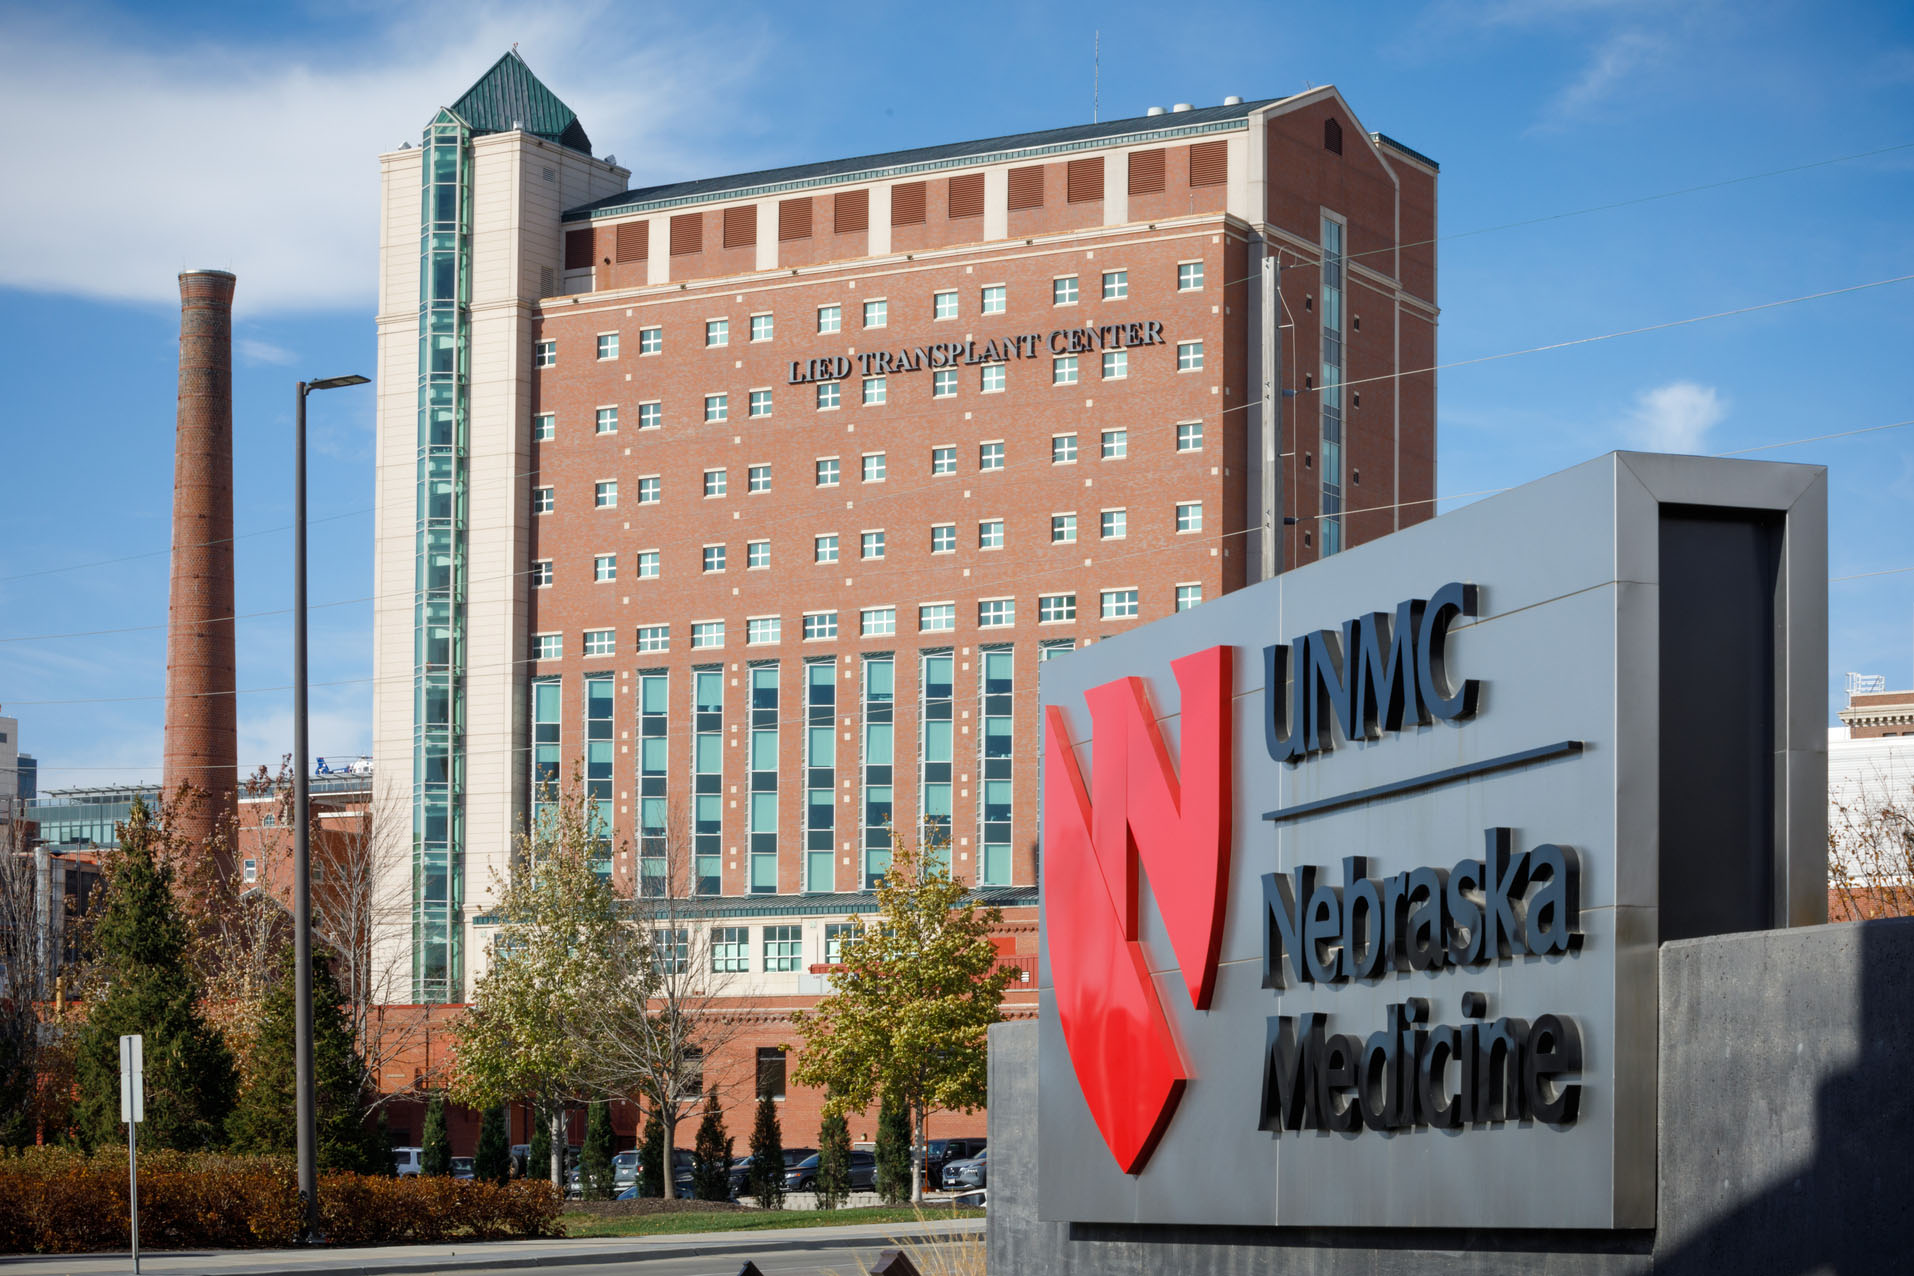 Emergency blood drive to be held at UNMC